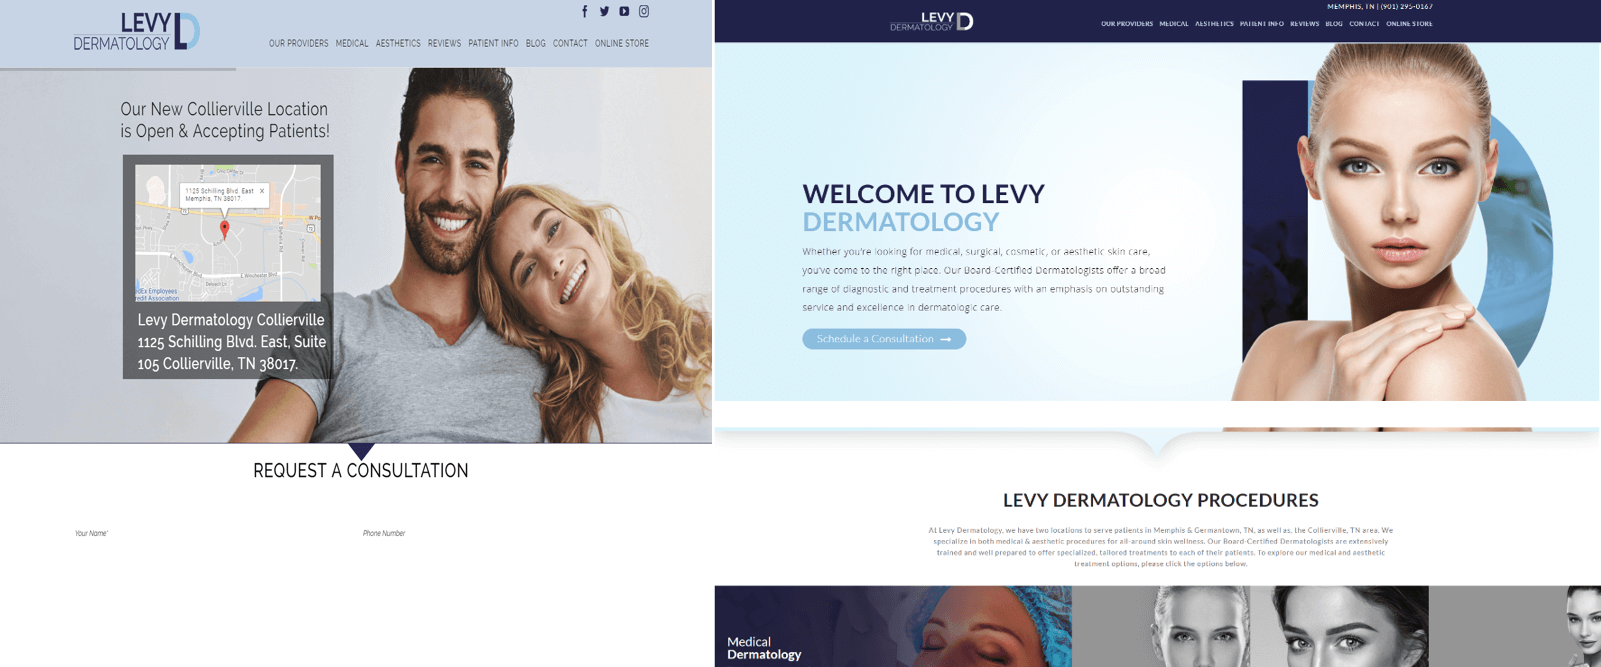 Levy Derm Home Page Before & After